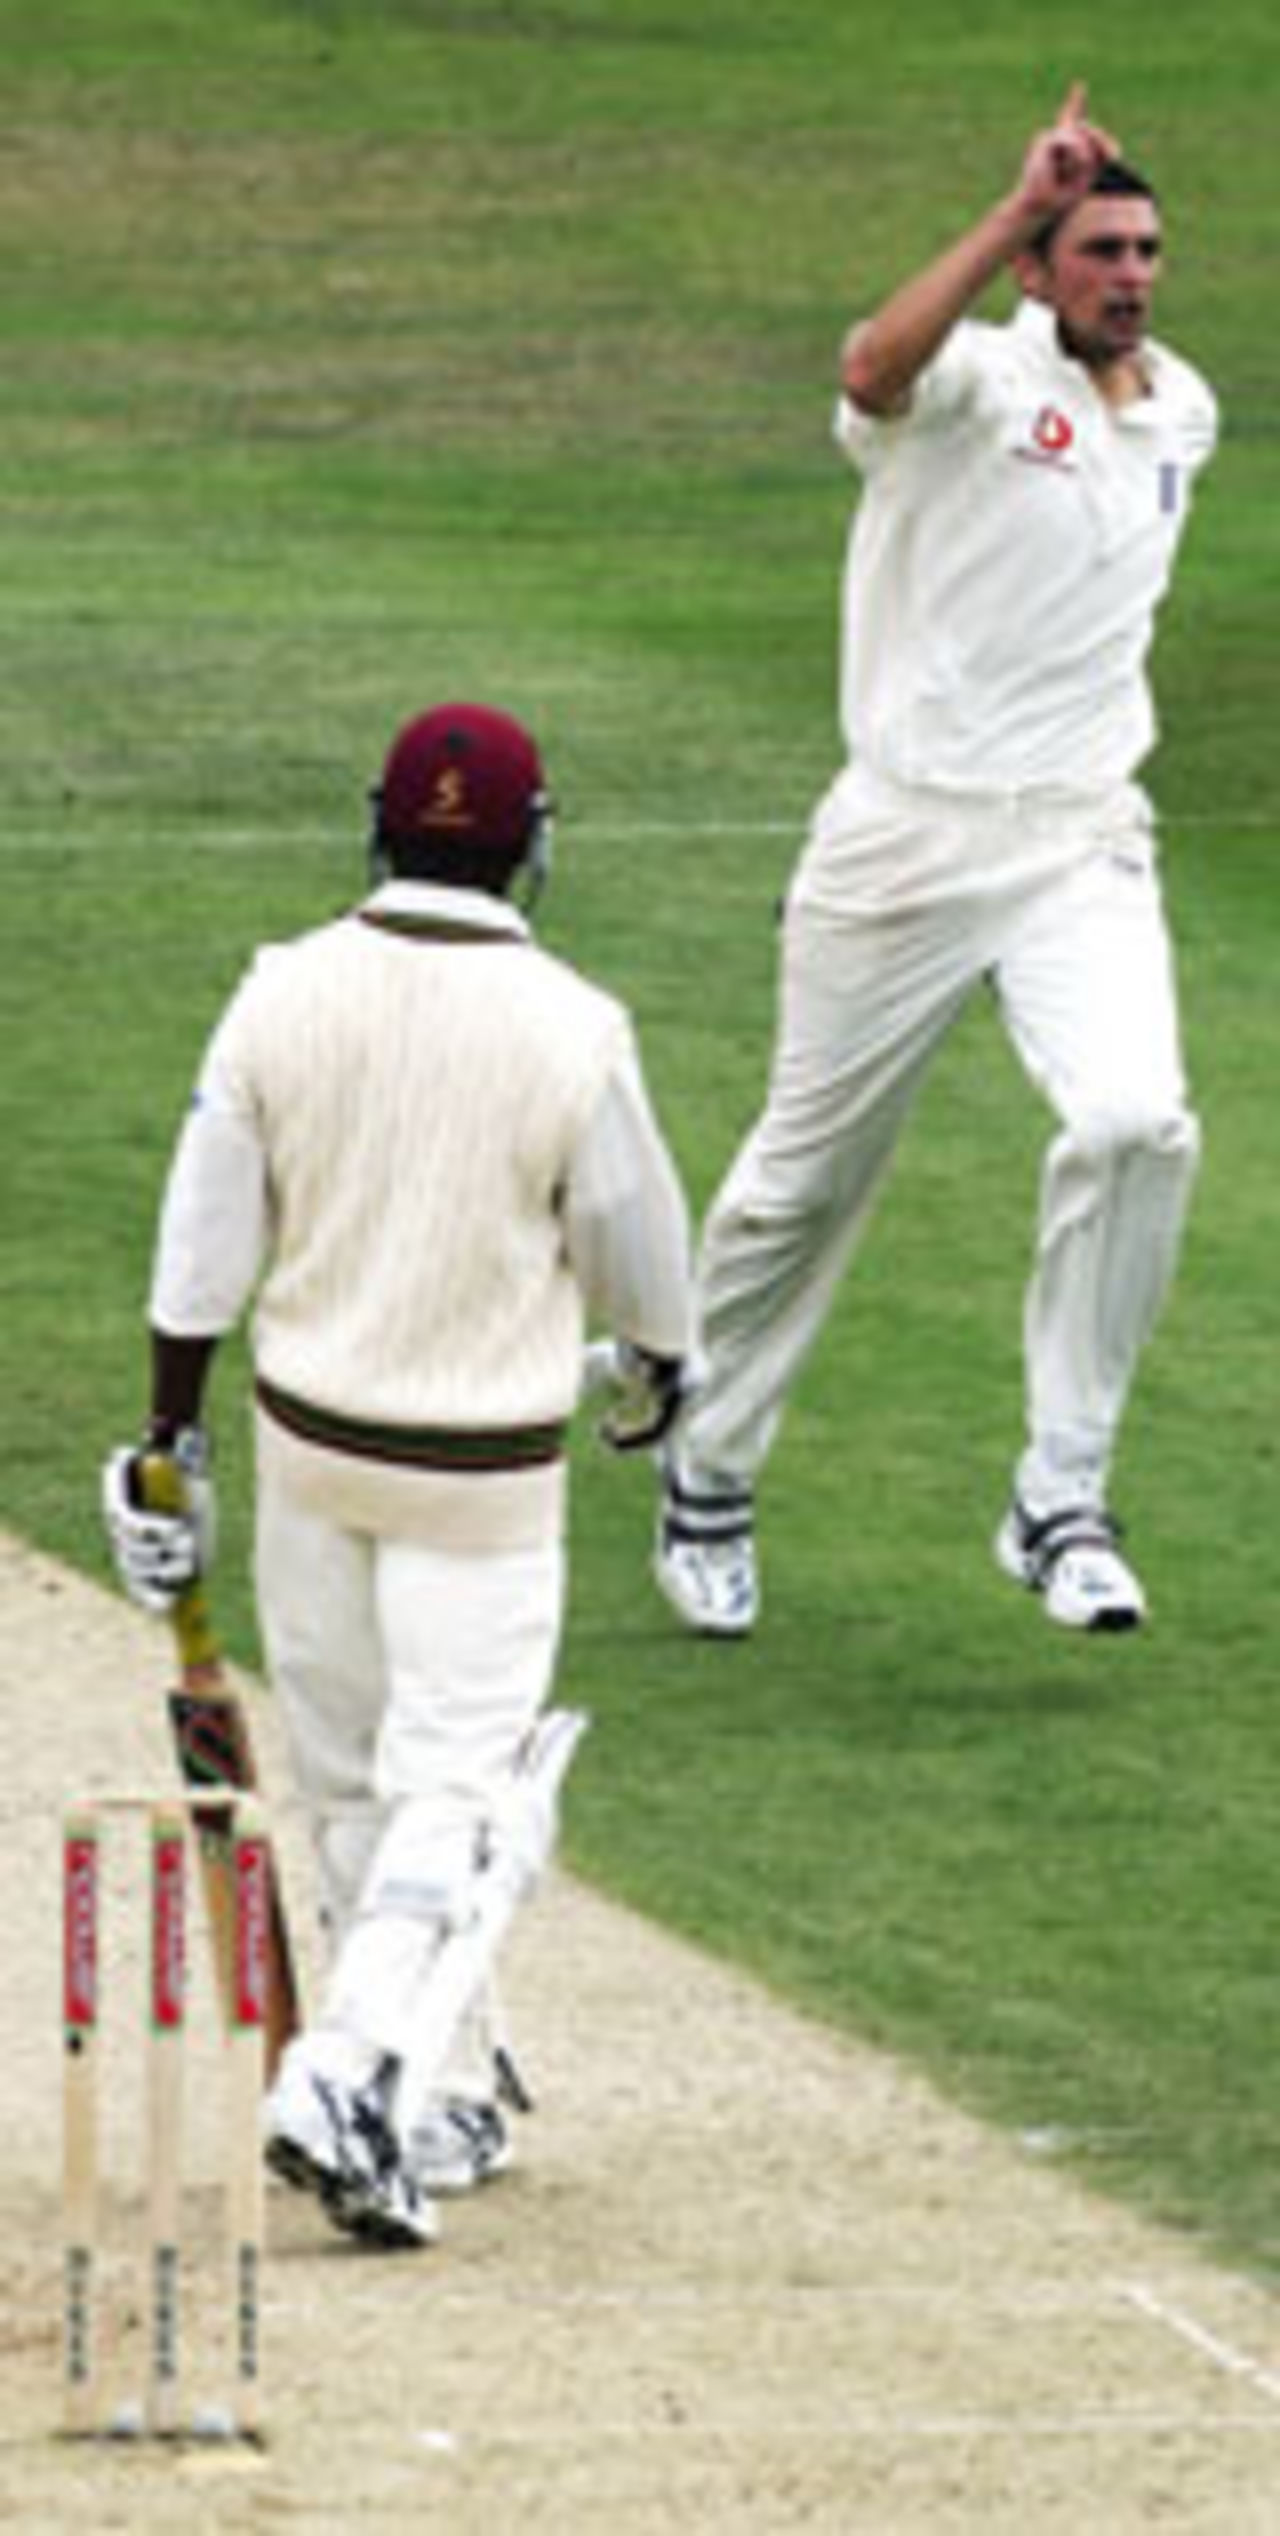 Steve Harmison celebrates a wicket, England v West Indies, 4th Test, The Oval, August 20 2004